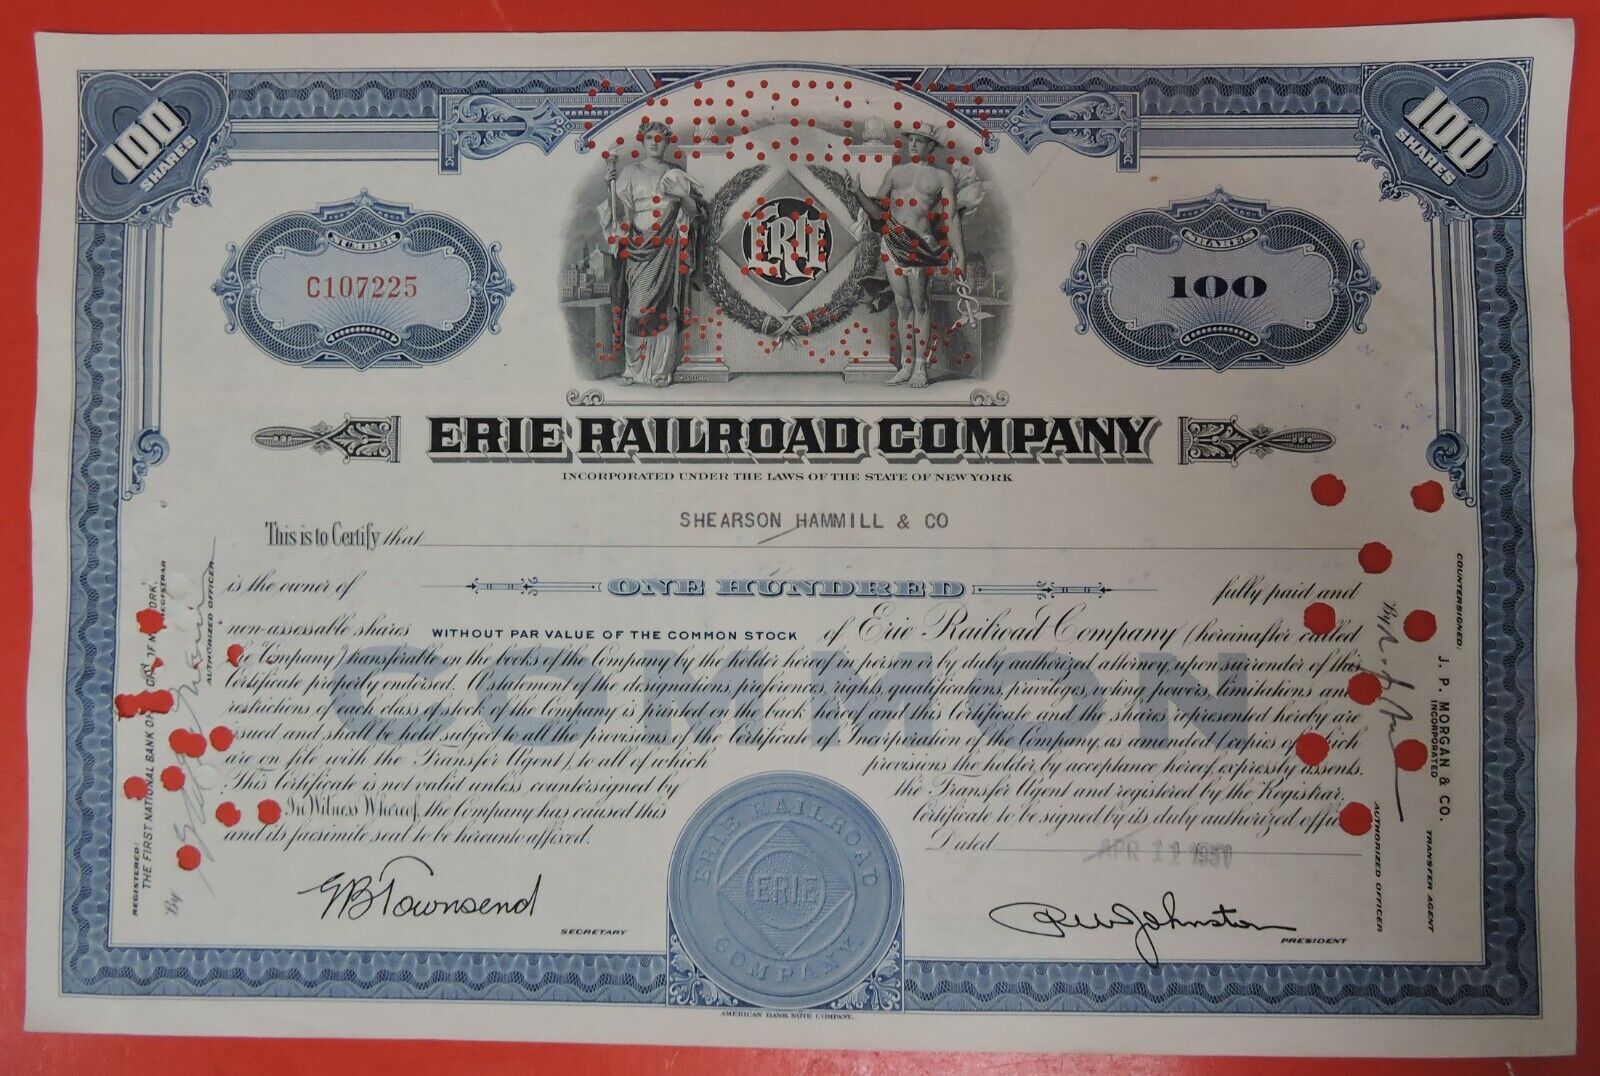 1951 ERIE RAILROAD COMPANY STOCK CERTIFICATE-100 SHARES